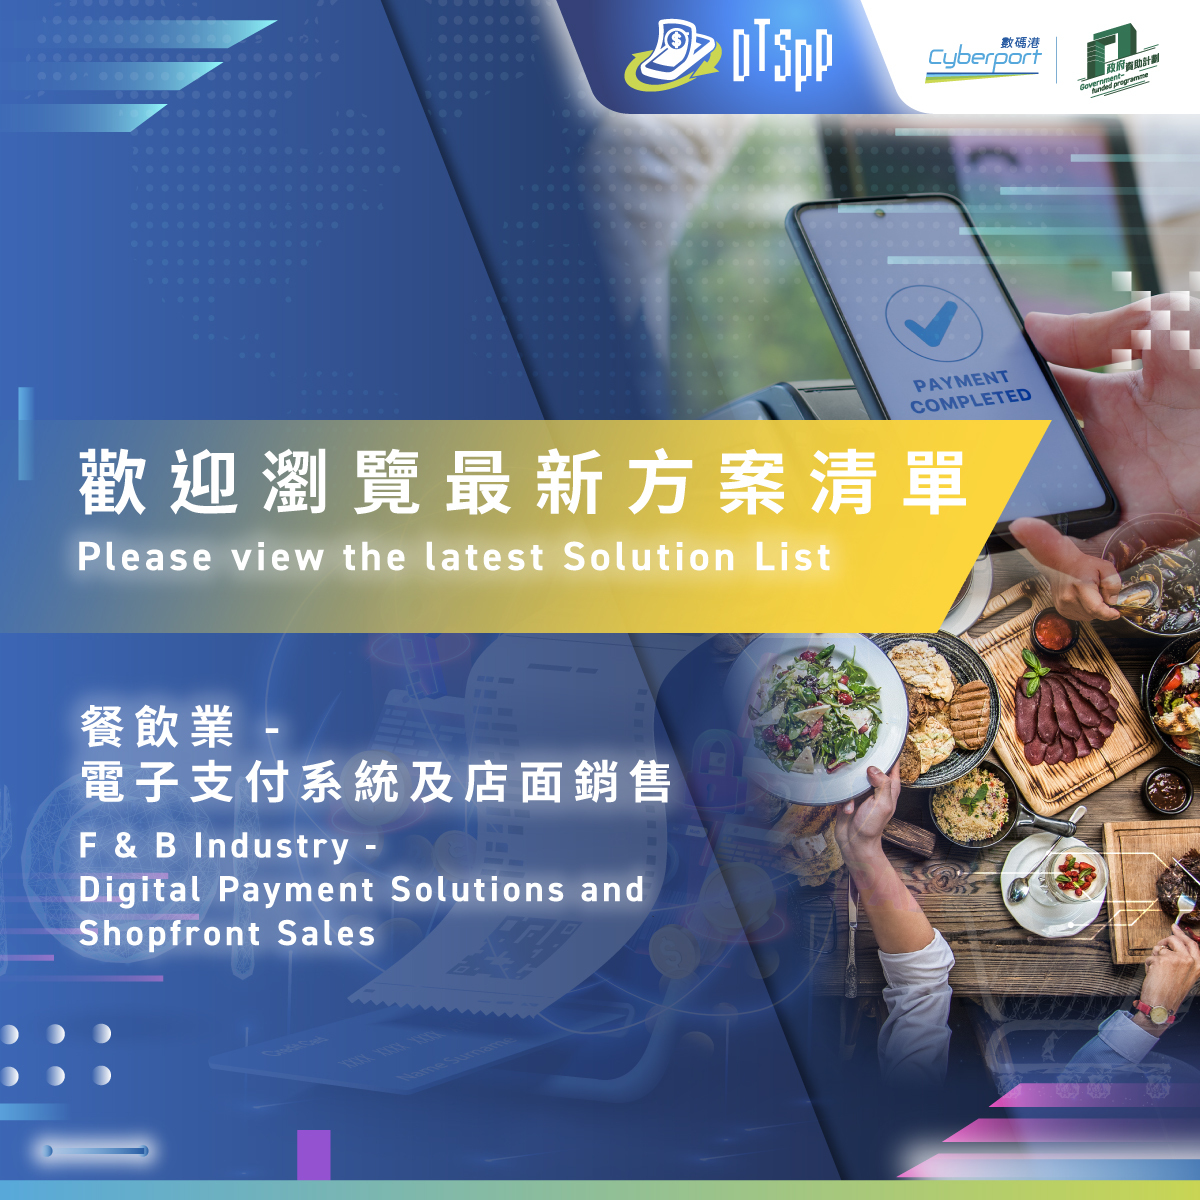 The first batch of approved Solution Providers and their respective digital solutions (packages), from the category of “Digital Payment Solutions and Shopfront Sales” targeting F & B SMEs, is available now! View the Solution List NOW: dtspp.cyberport.hk/solutions/ #Cyberport #DTSPP…